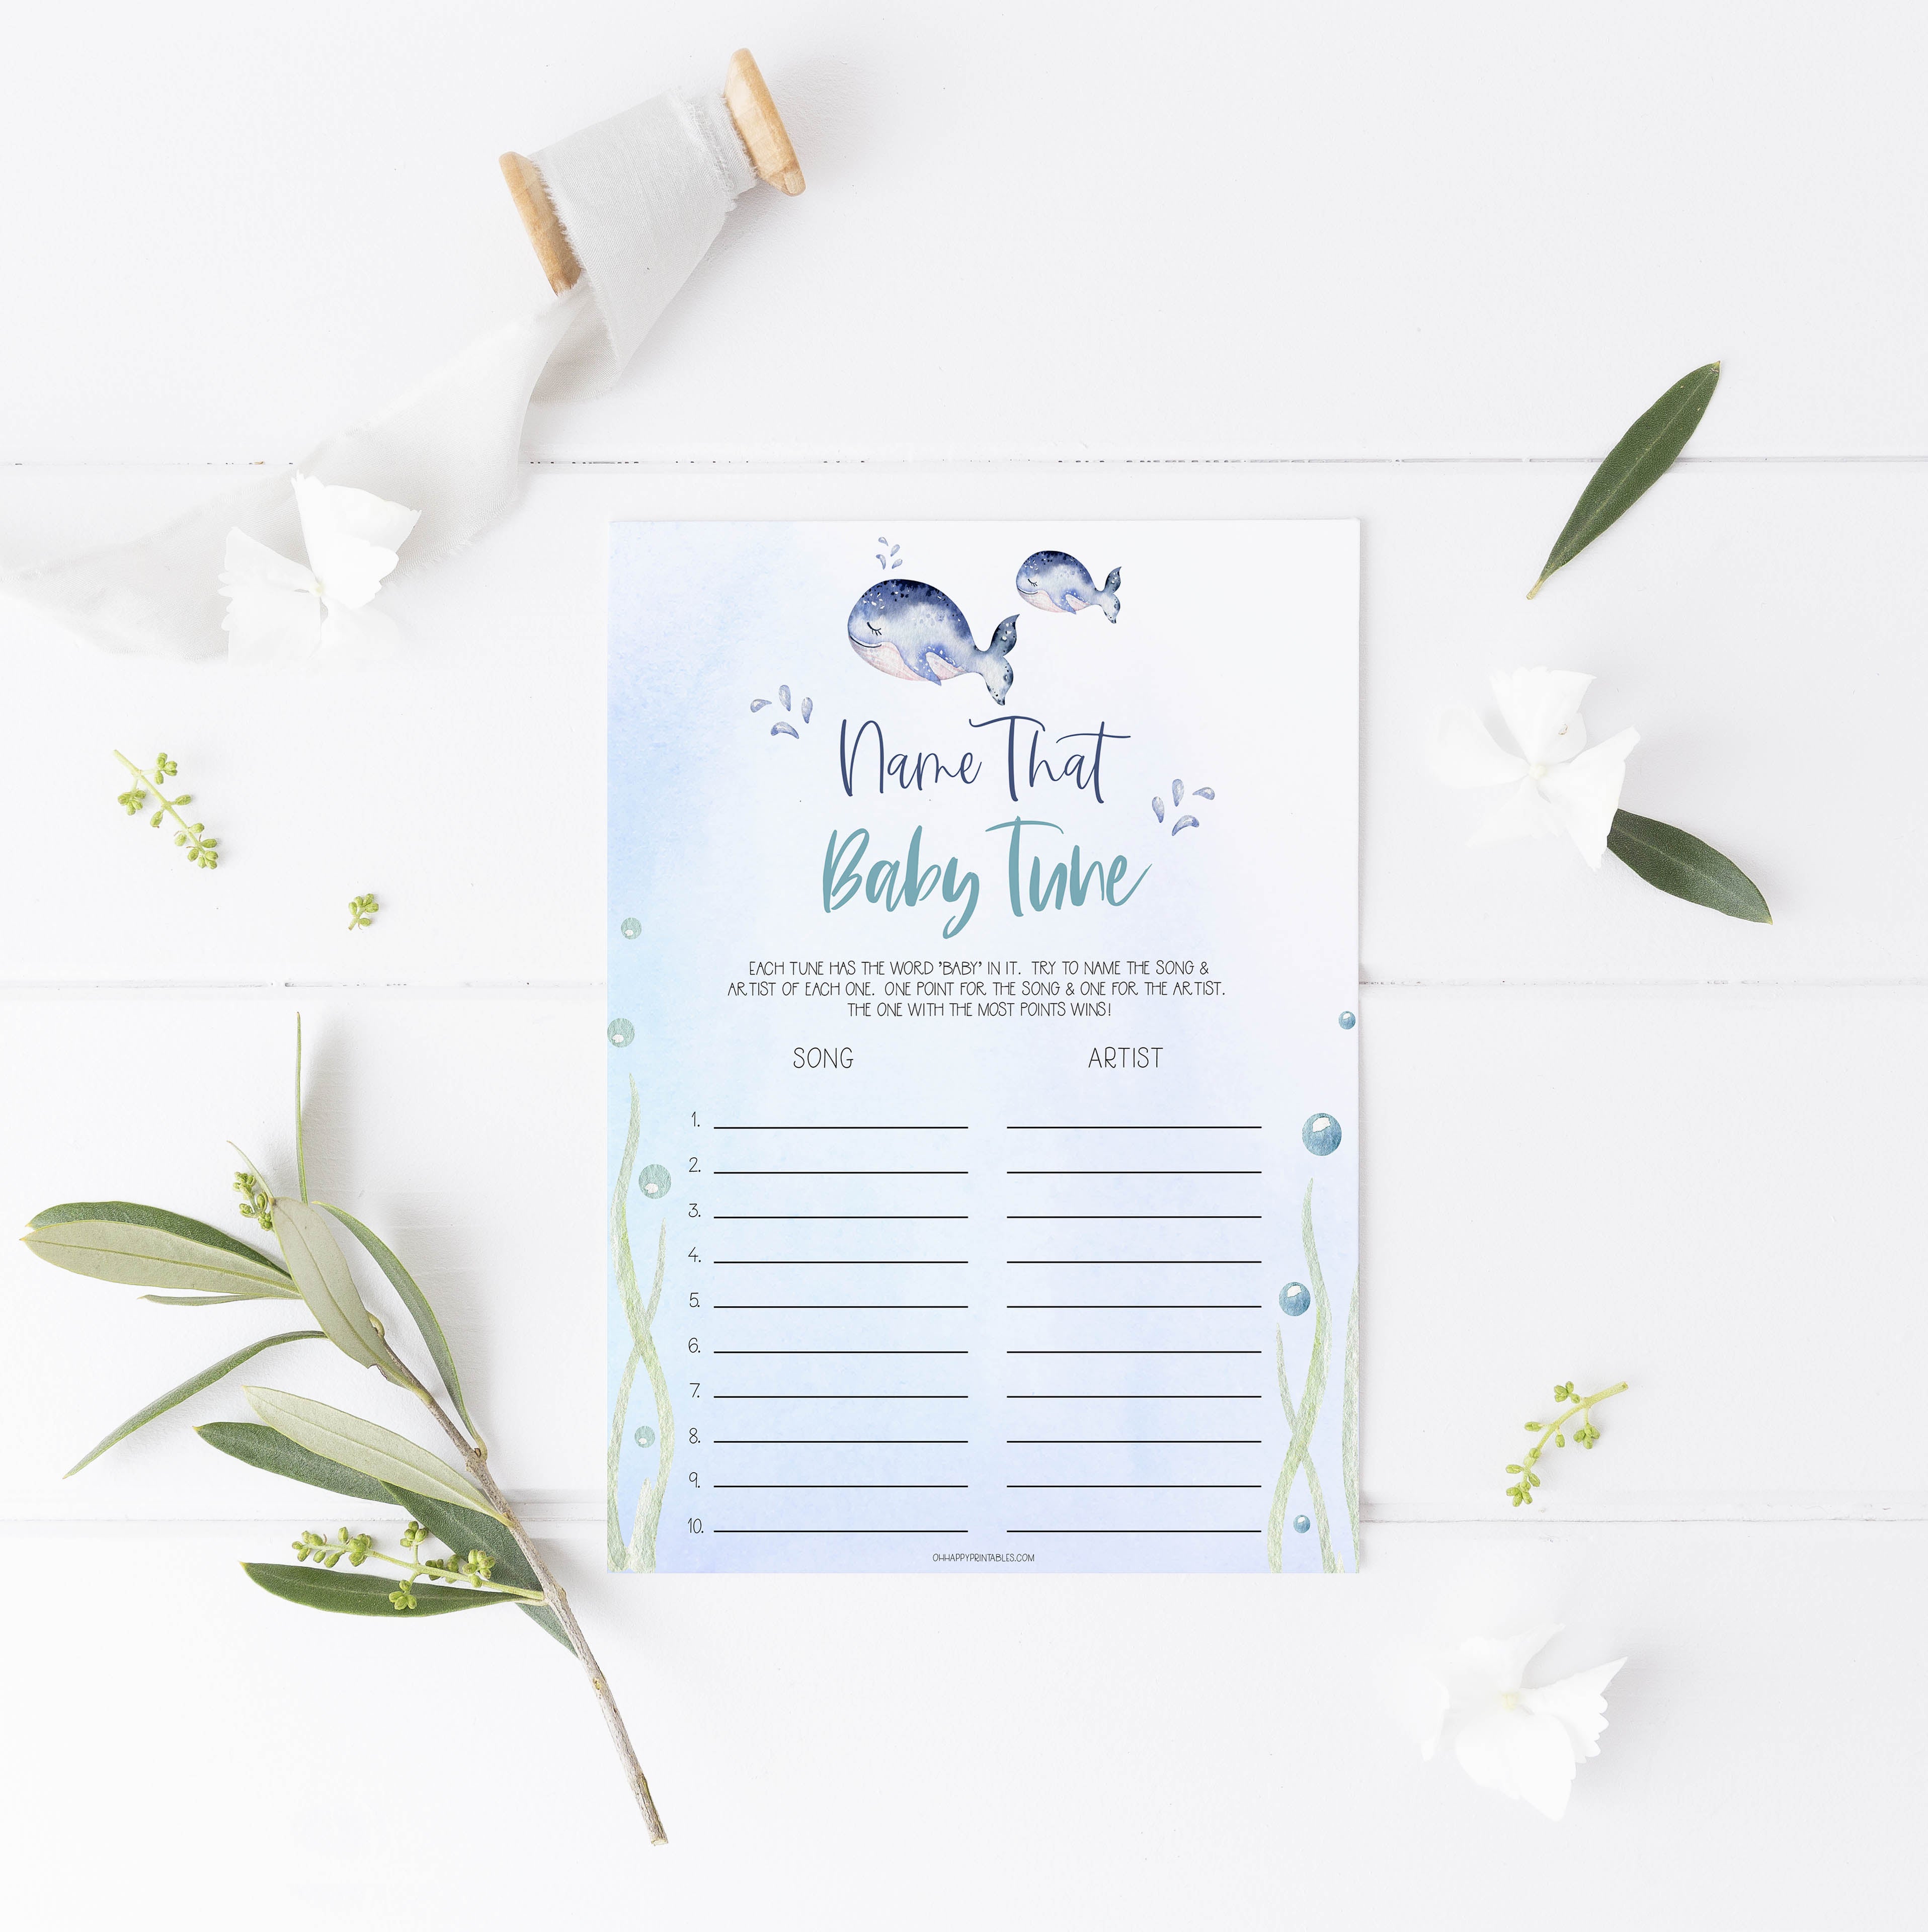 name that baby tune game, Printable baby shower games, whale baby games, baby shower games, fun baby shower ideas, top baby shower ideas, whale baby shower, baby shower games, fun whale baby shower ideas